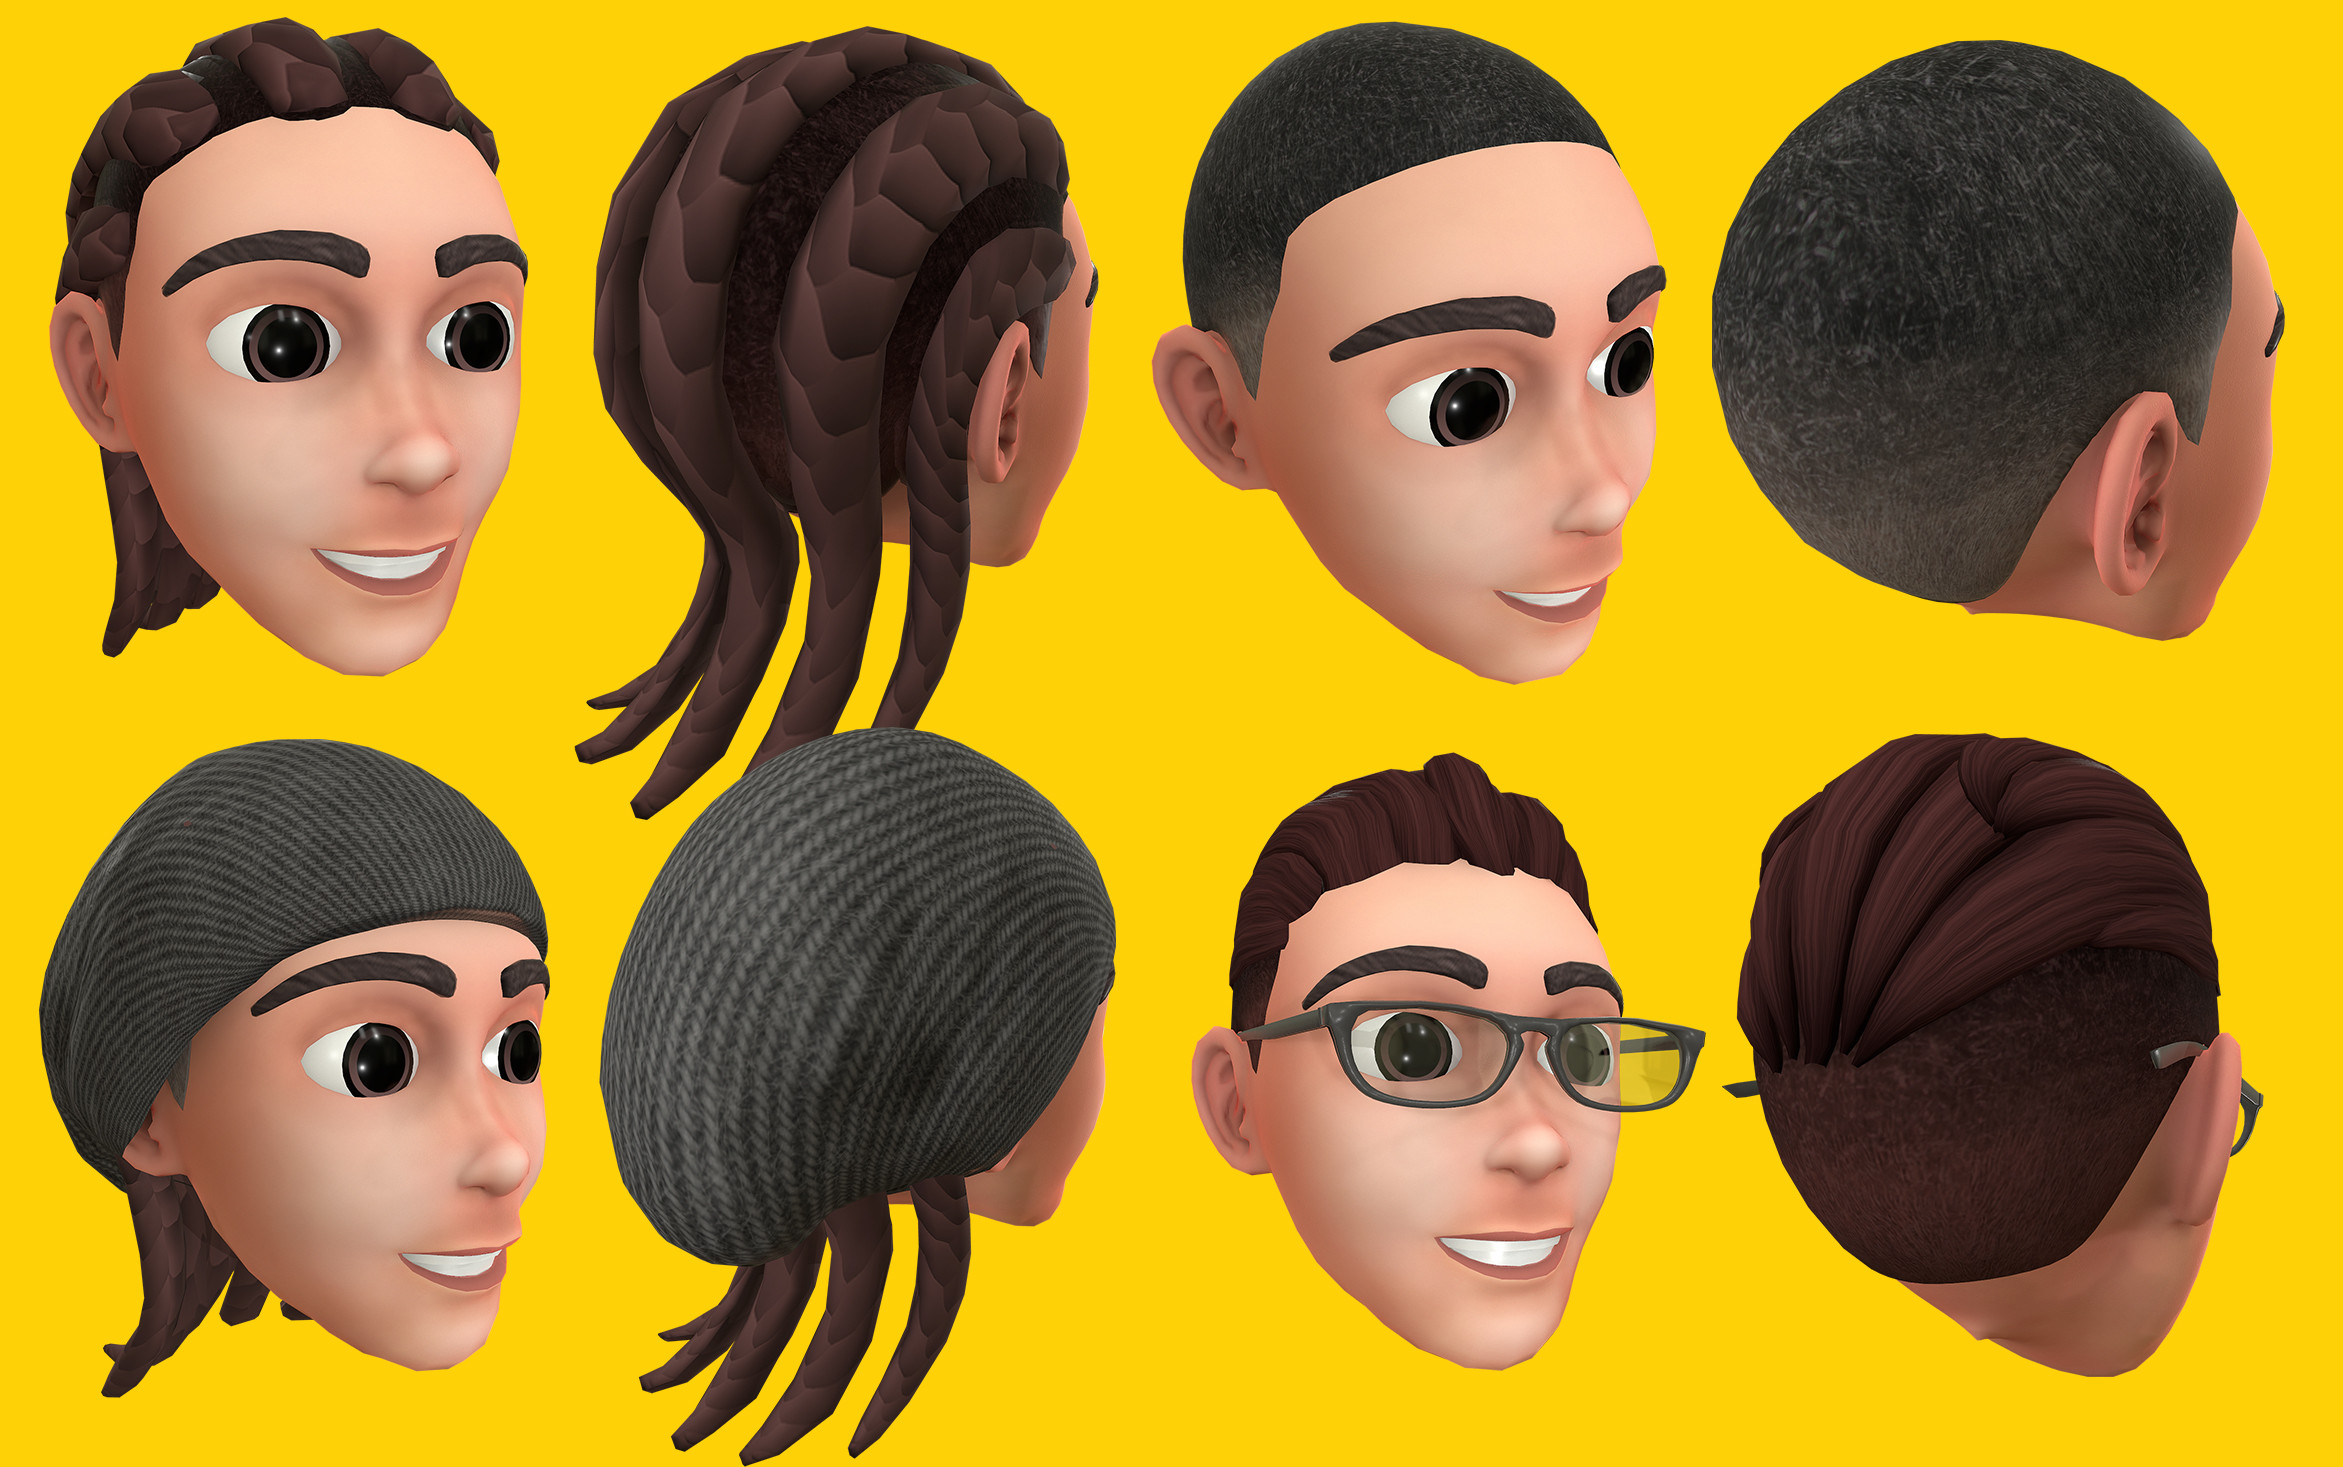 Textured hair styles &amp; accessories. Lead 3D Artist on hairstyles consistency and training. Modeling of hairs &amp; wool-cap by Mark Lopez and Mert Suha Oner.